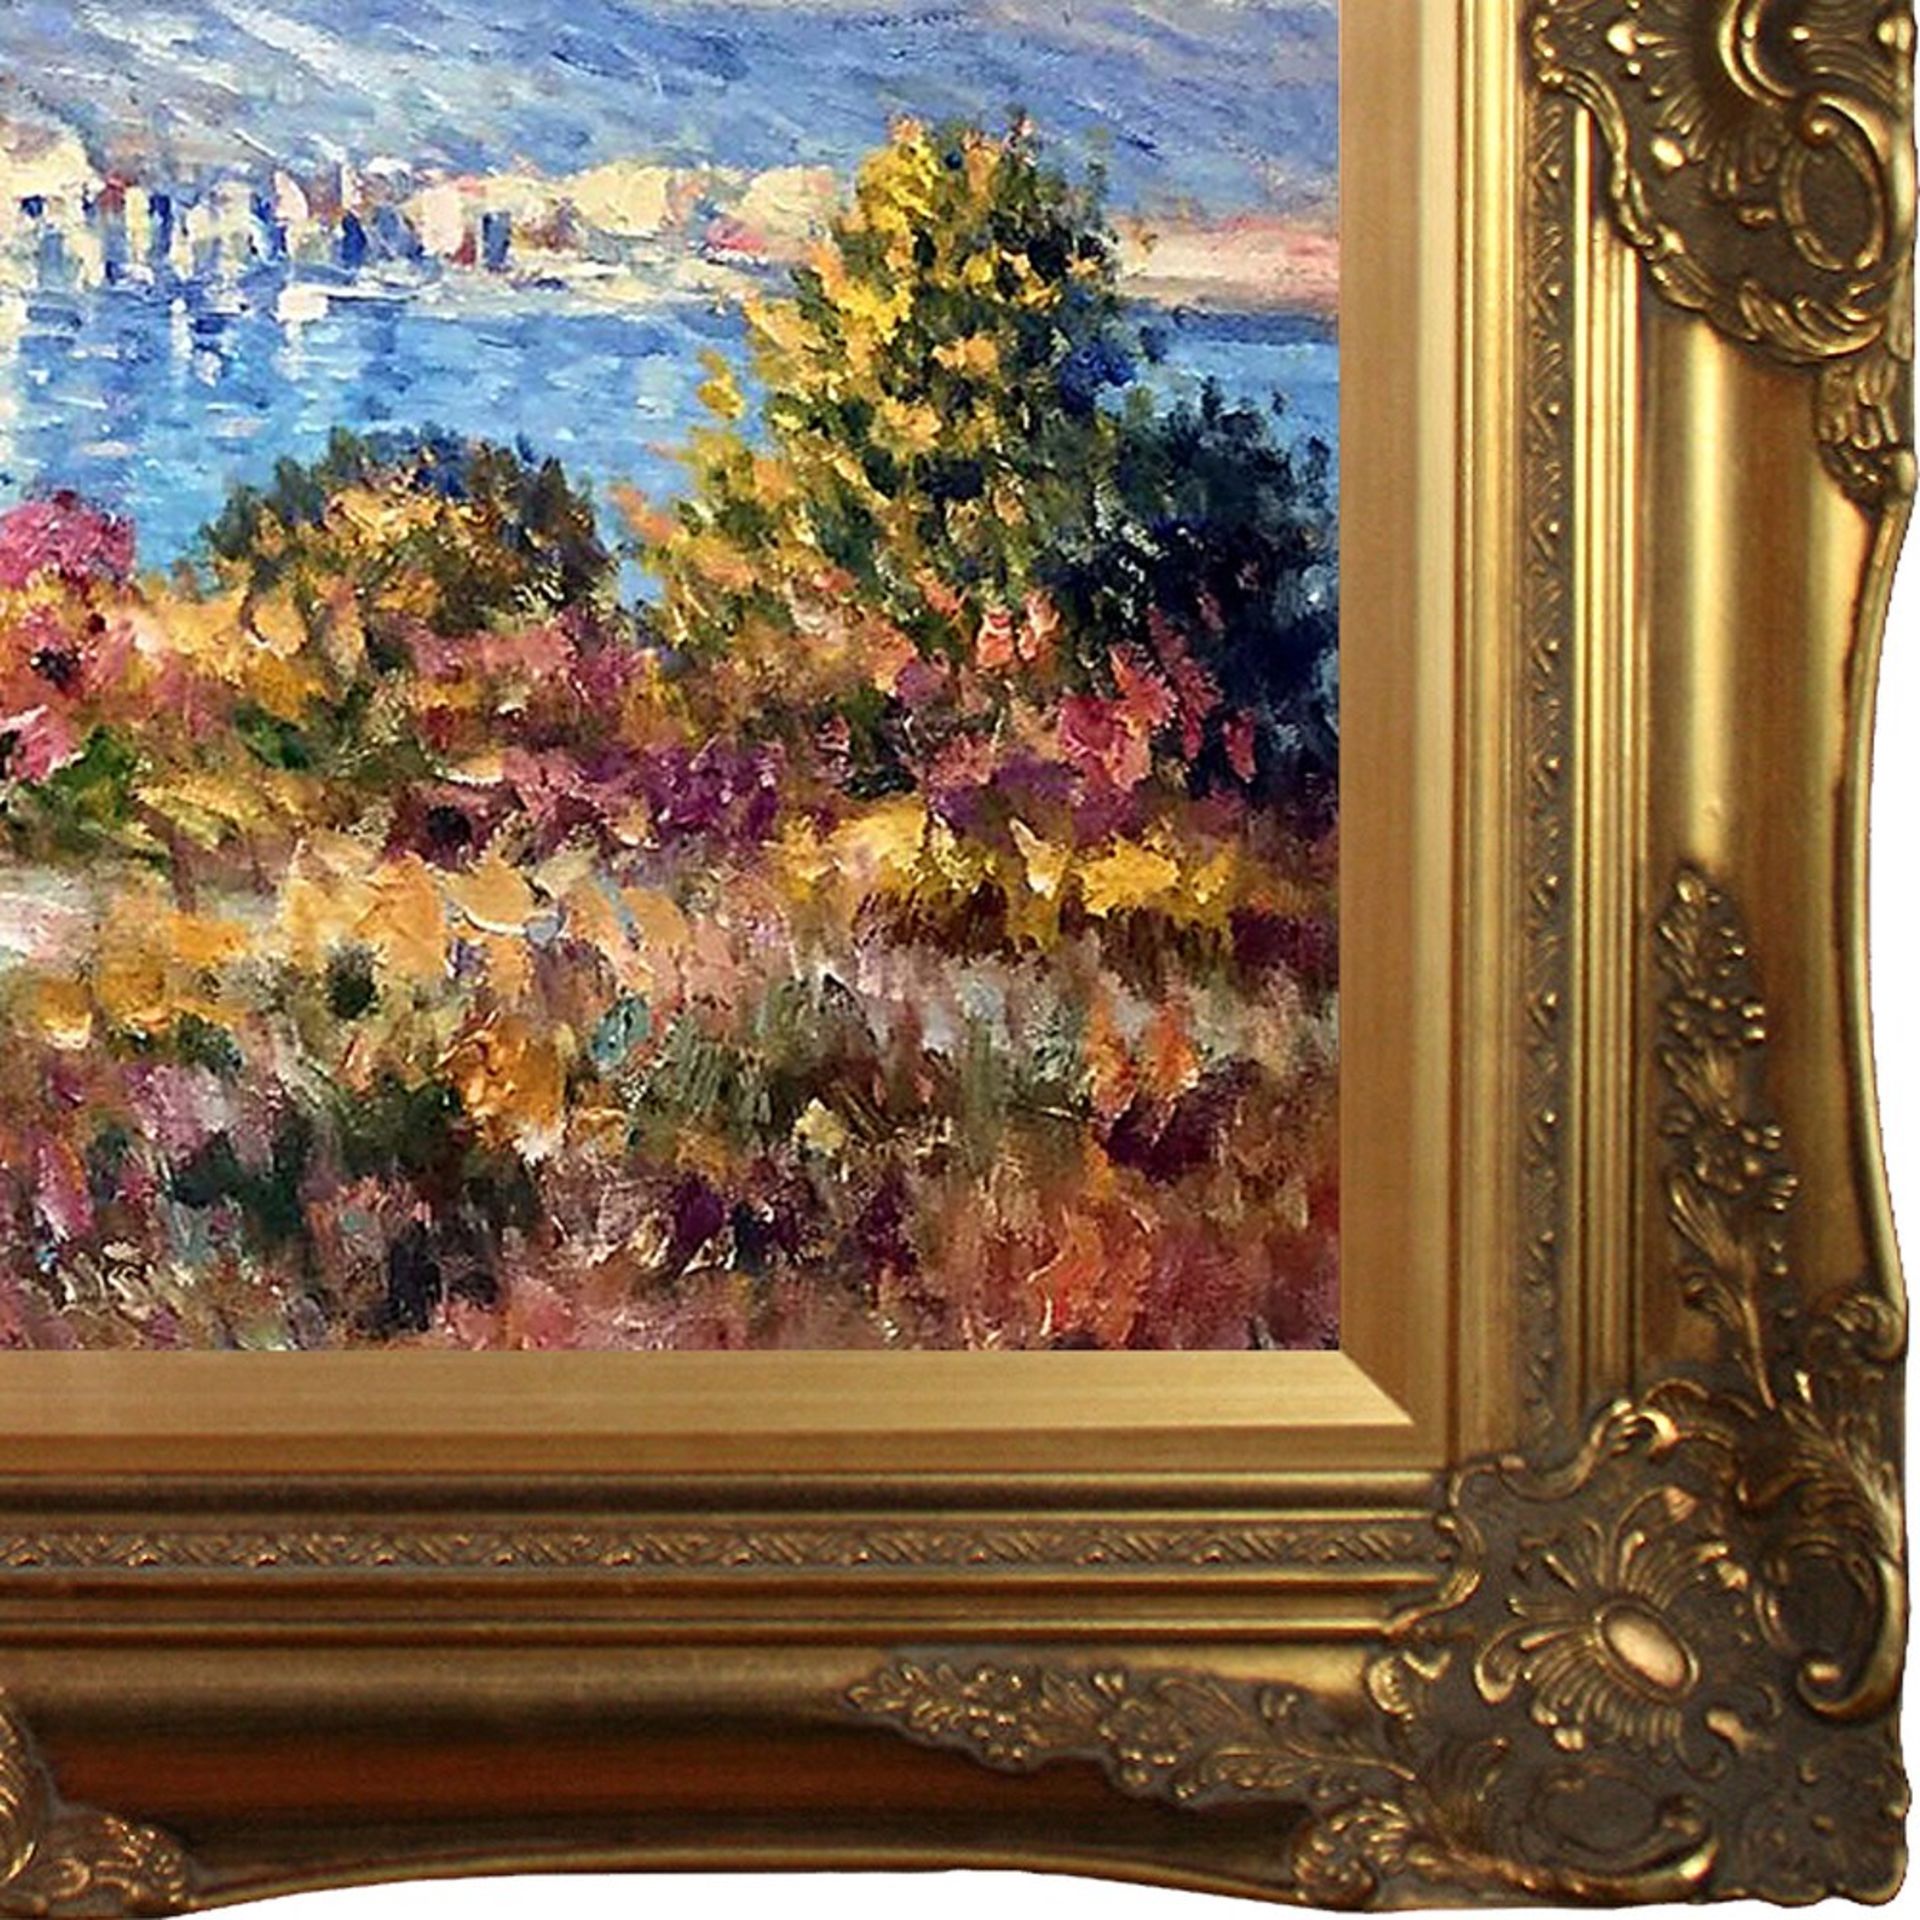 Claude Monet "Antibes, 1888" Oil Painting, After - Image 2 of 6